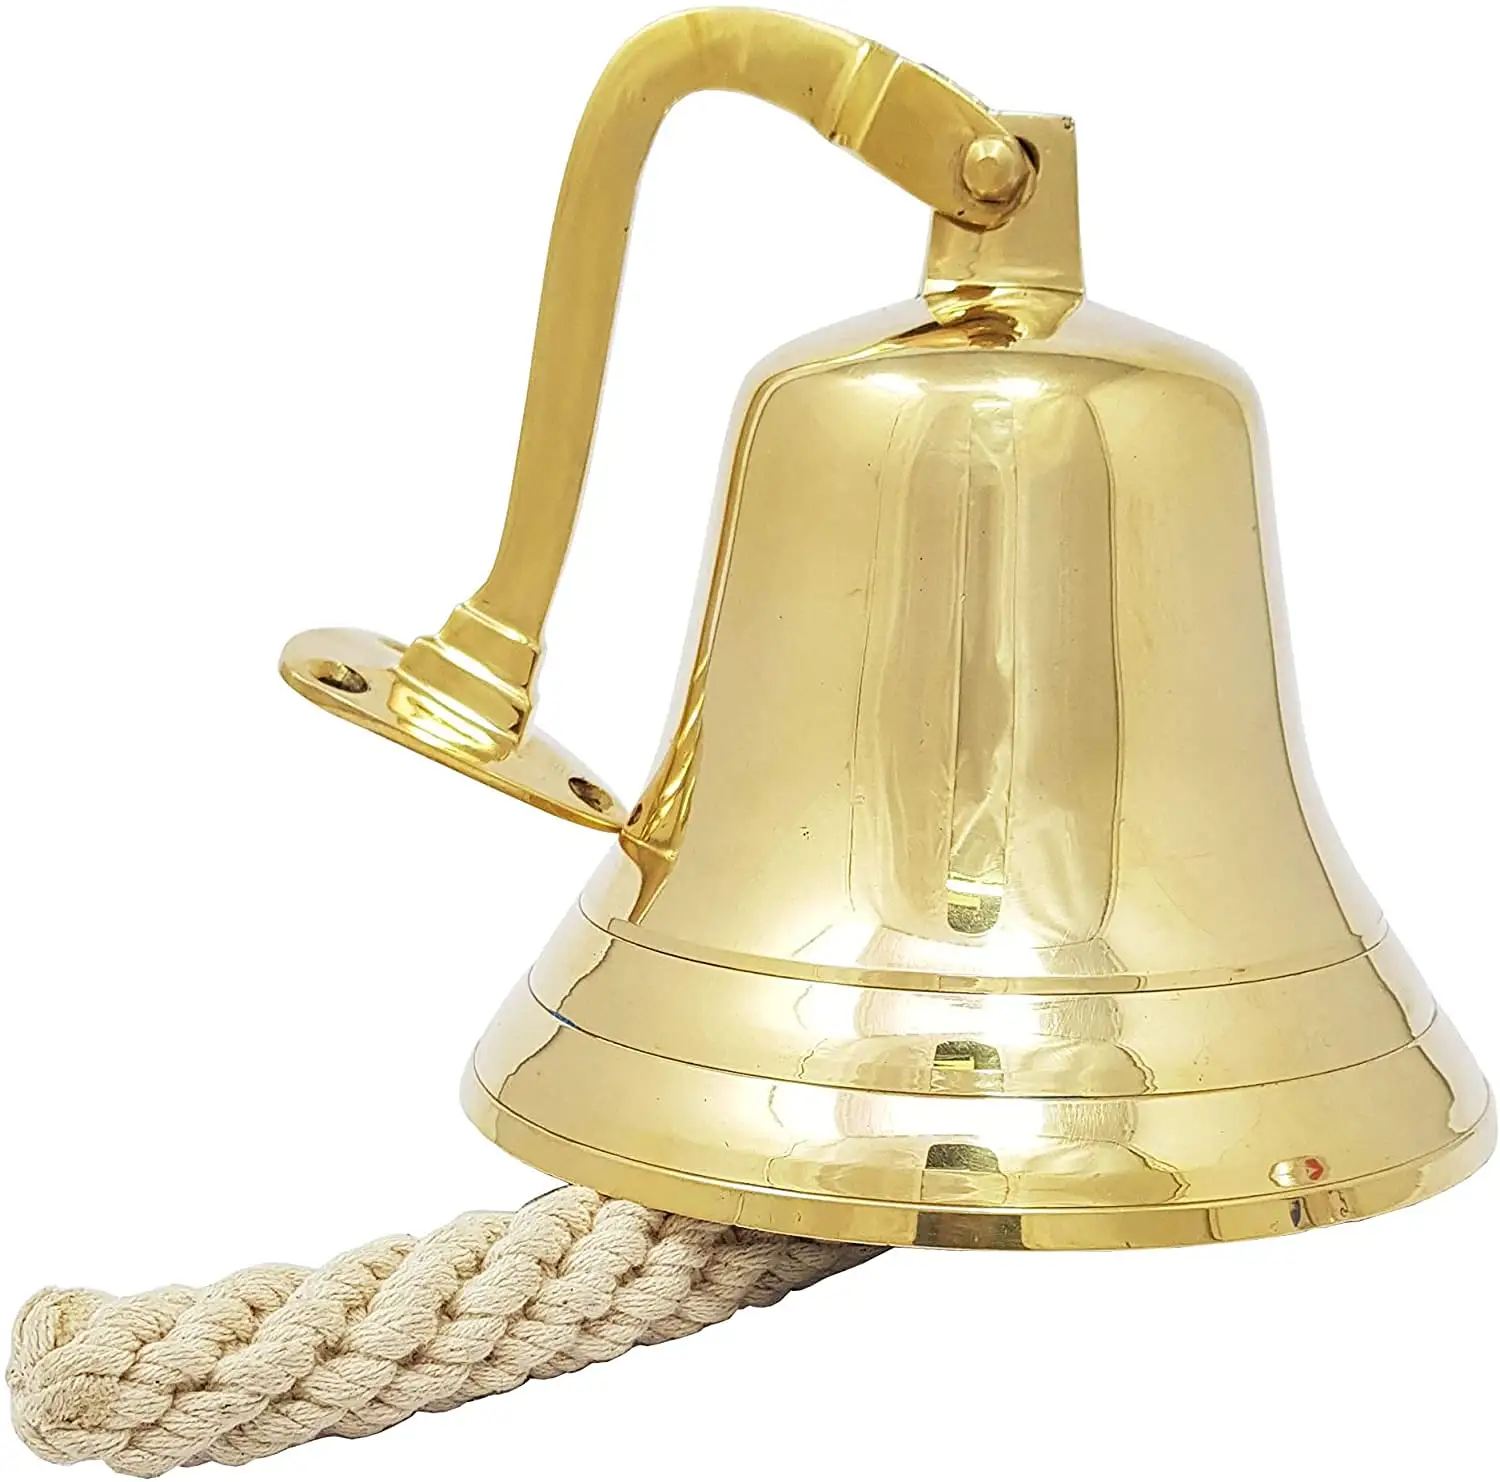 Handcrafted Brass Ship Bell Polished Nautical Heavy Duty Polished Brass Bell Nautical Hand Hanging